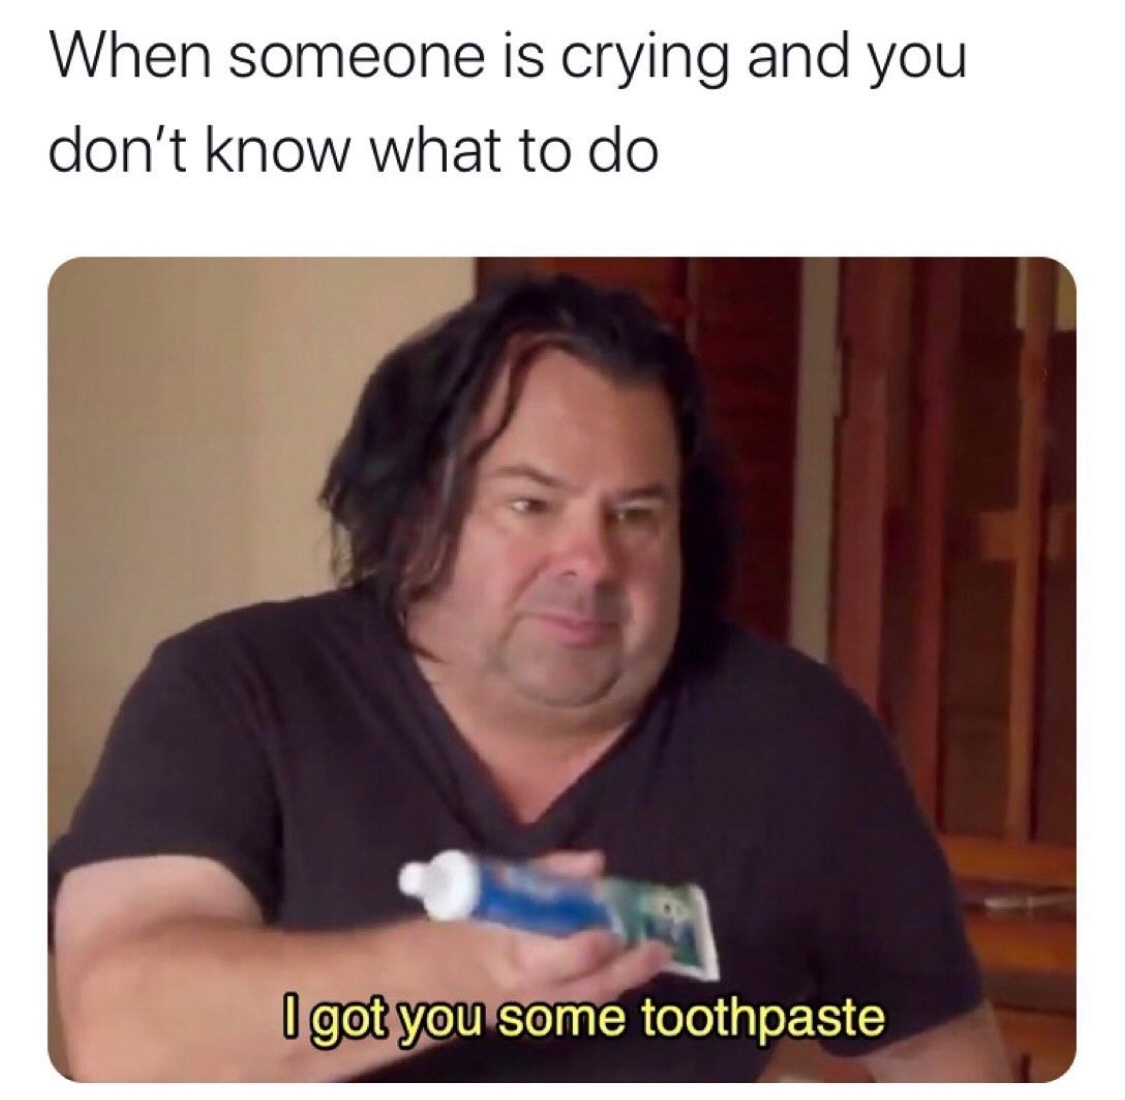 Everyone does need toothpaste.... - meme